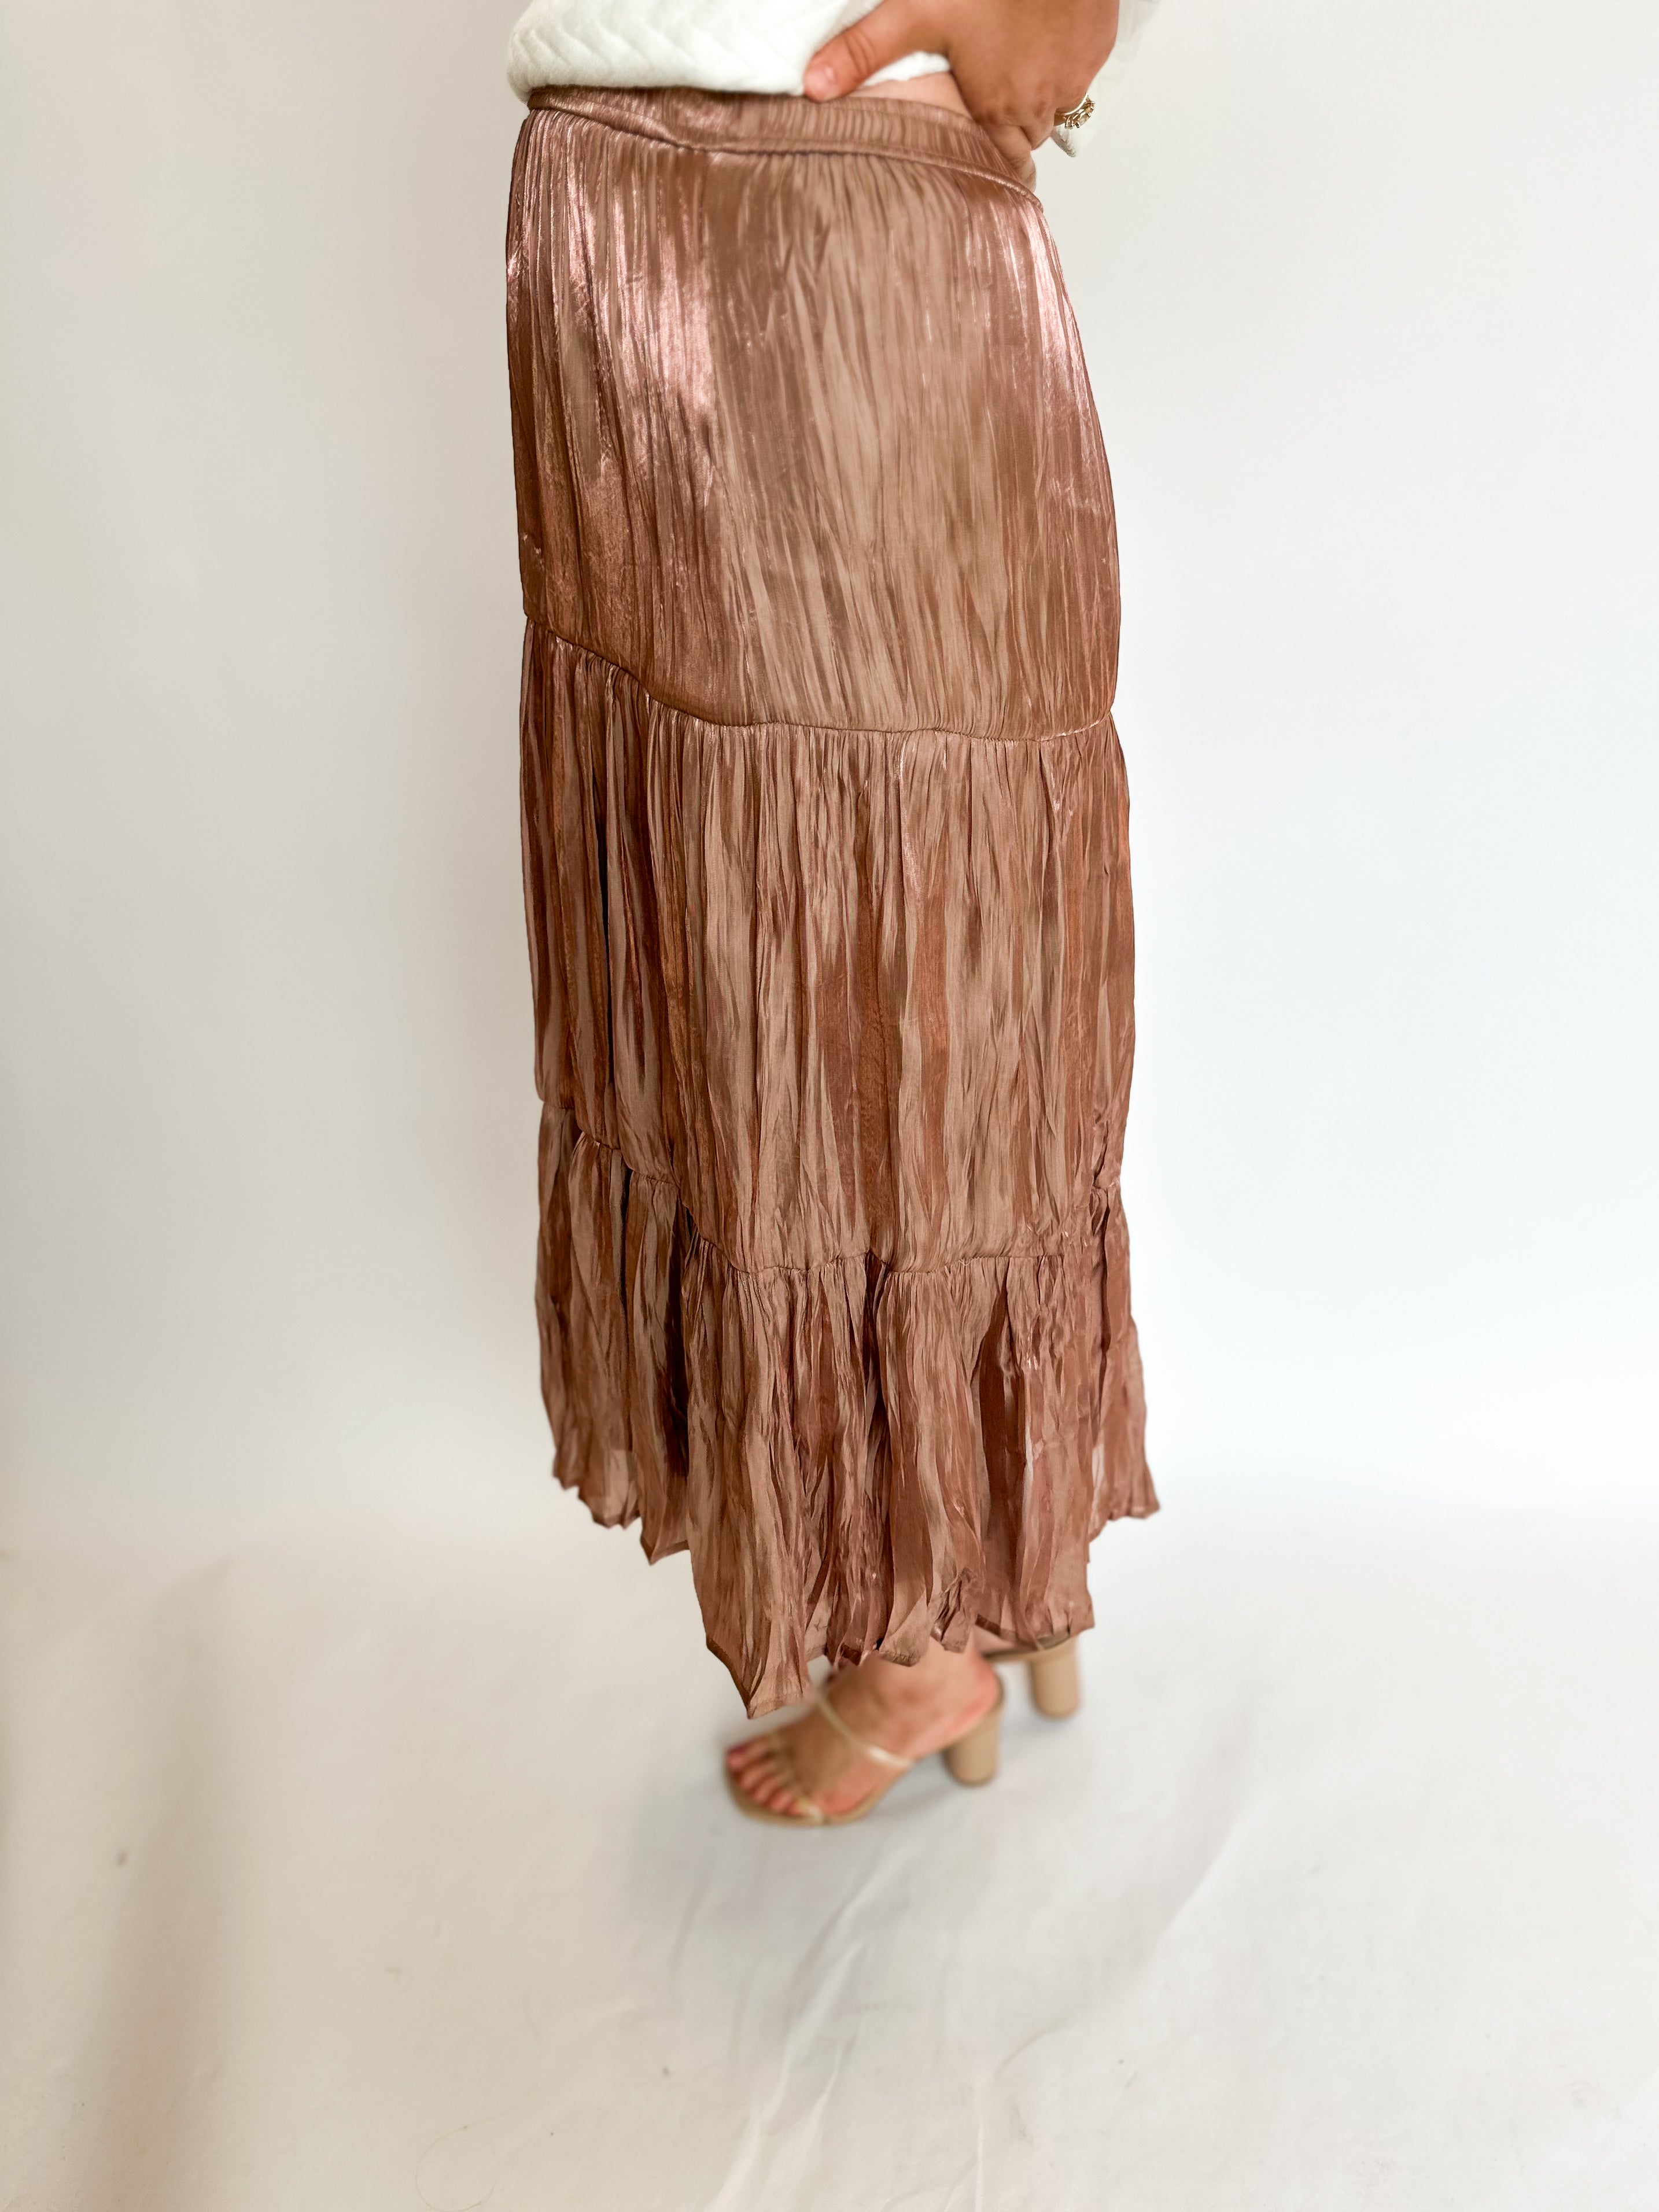 Mocha Shimmer Midi Skirt-410 Shorts/Skirts-ALLIE ROSE-July & June Women's Fashion Boutique Located in San Antonio, Texas